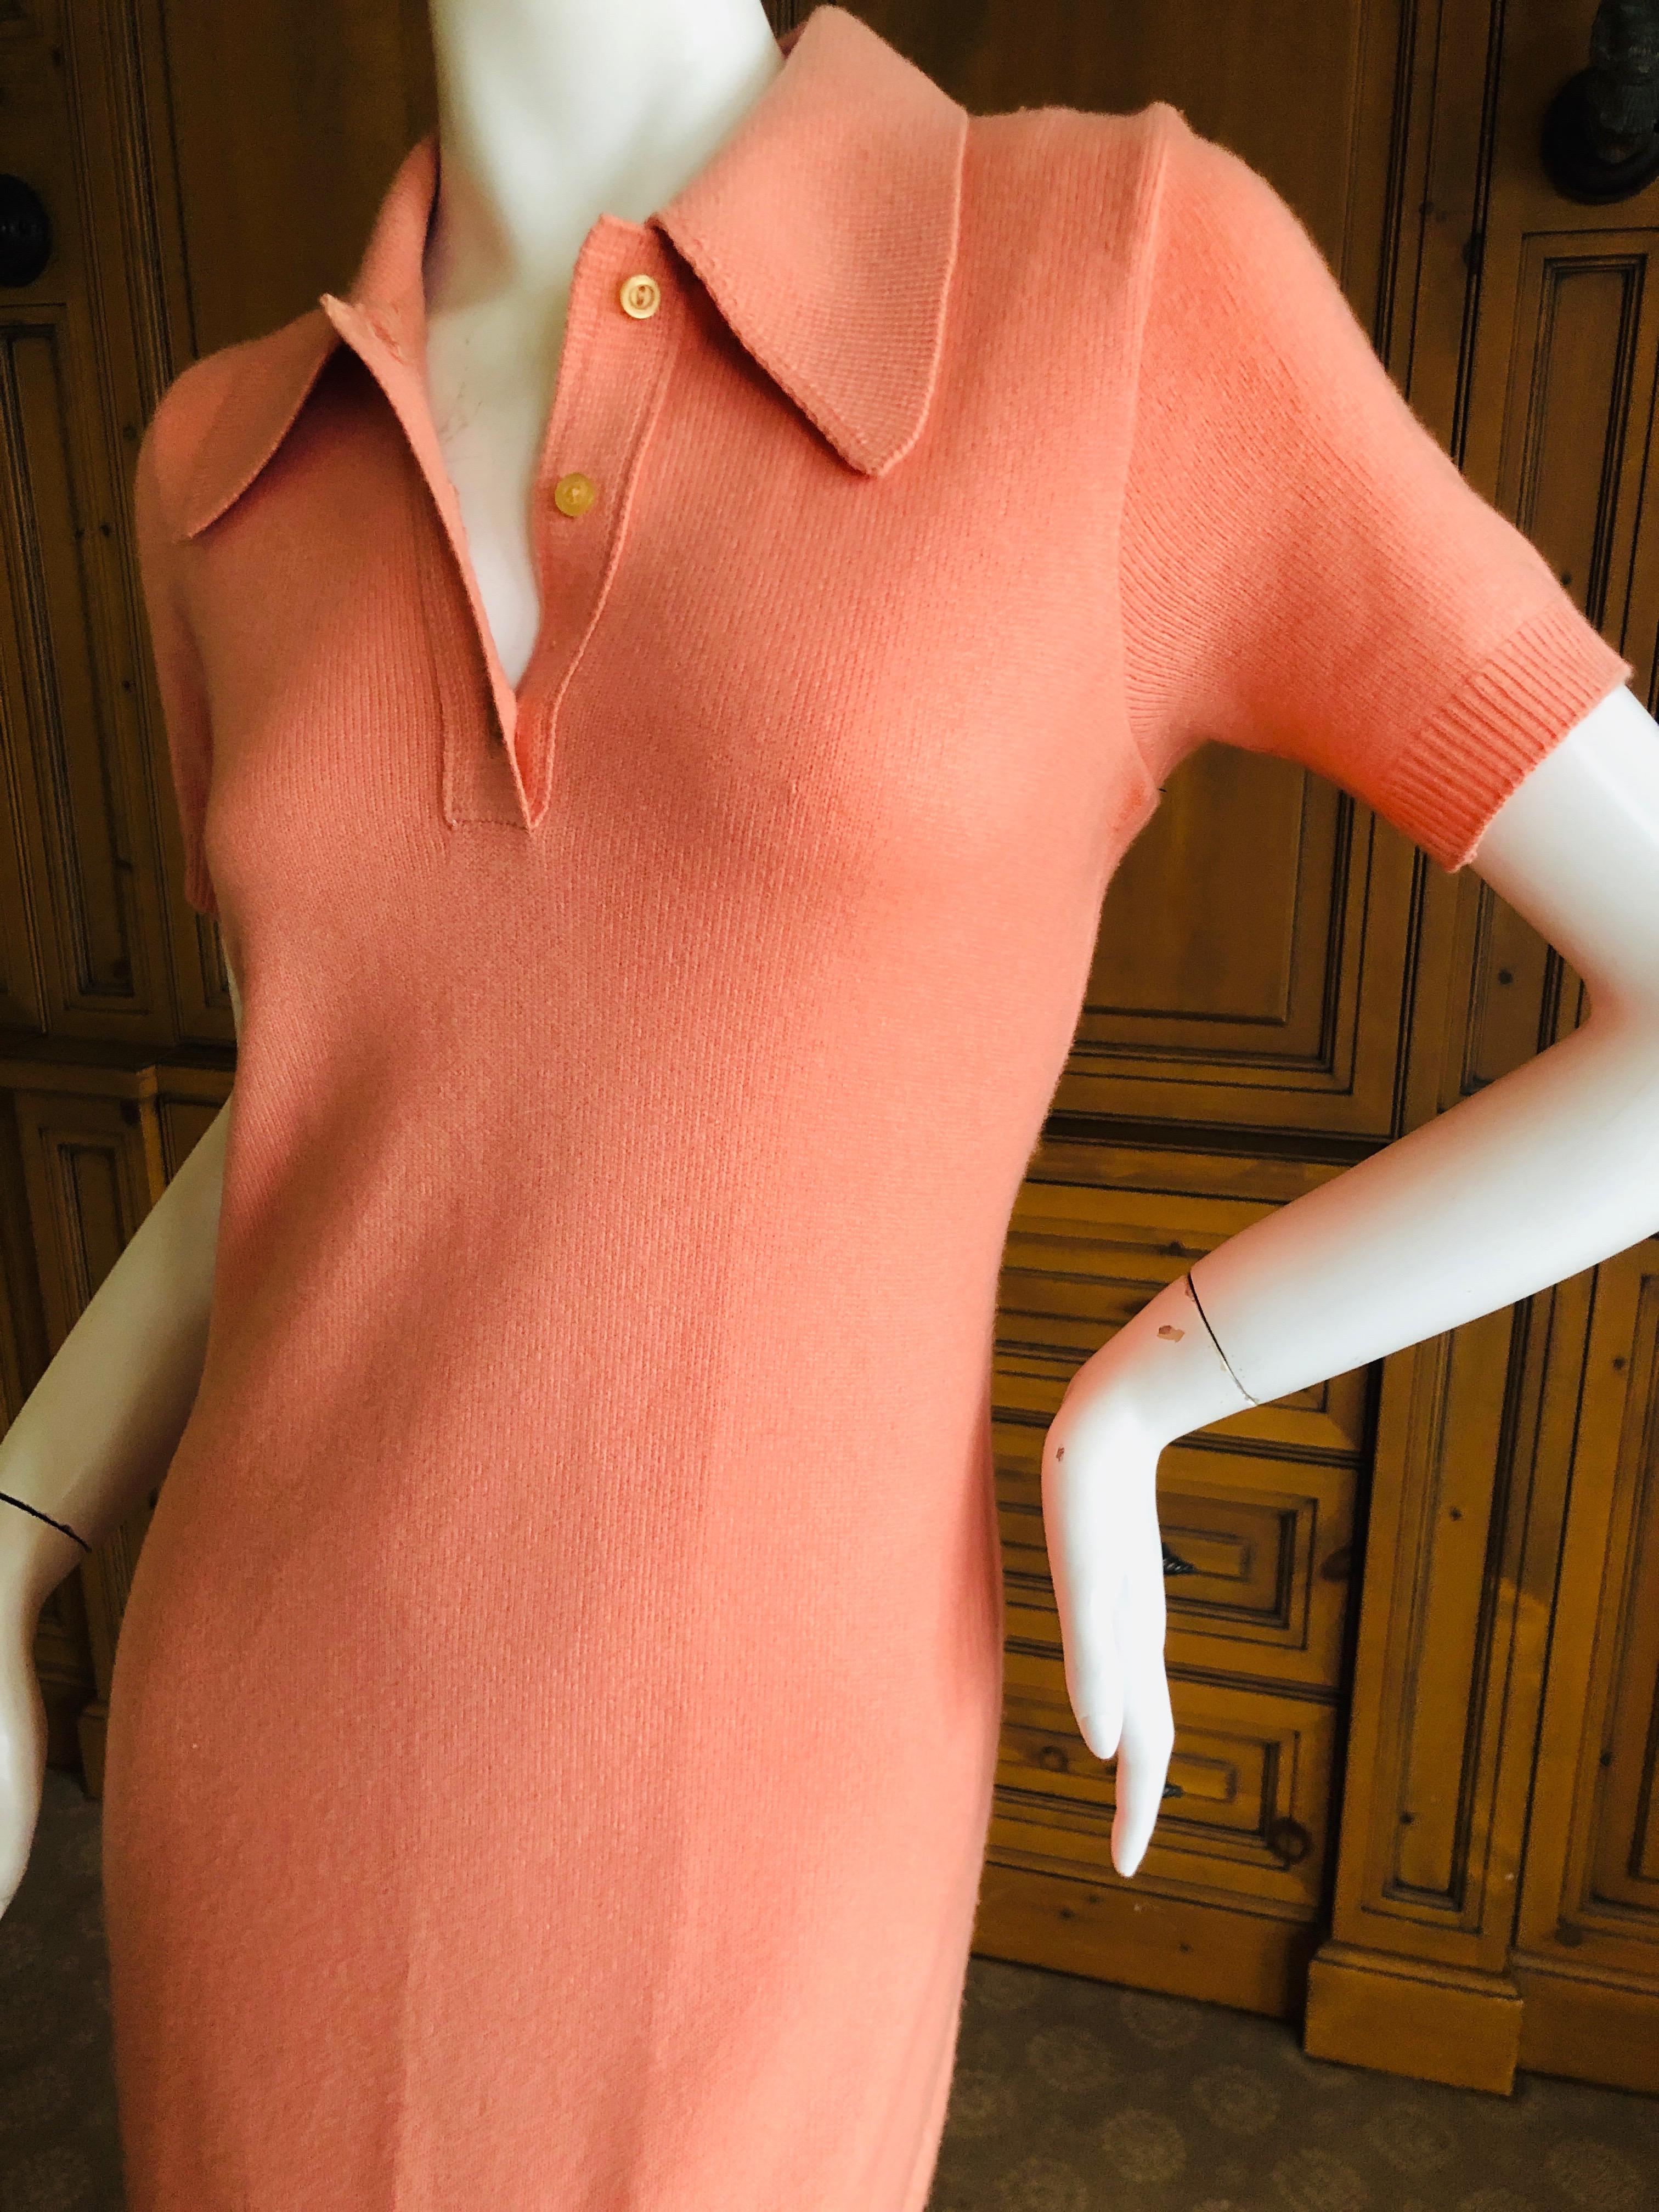 Halston 1970's Pure Scottish Cashmere Polo Evening Dress for Martha Park Avenue.
This style was like a uniform for Park Avenue Ladies who lunch in the seventies.
Luxurious pure Scottish Cashmere to the floor, yet a simple polo style, so chic
Pure